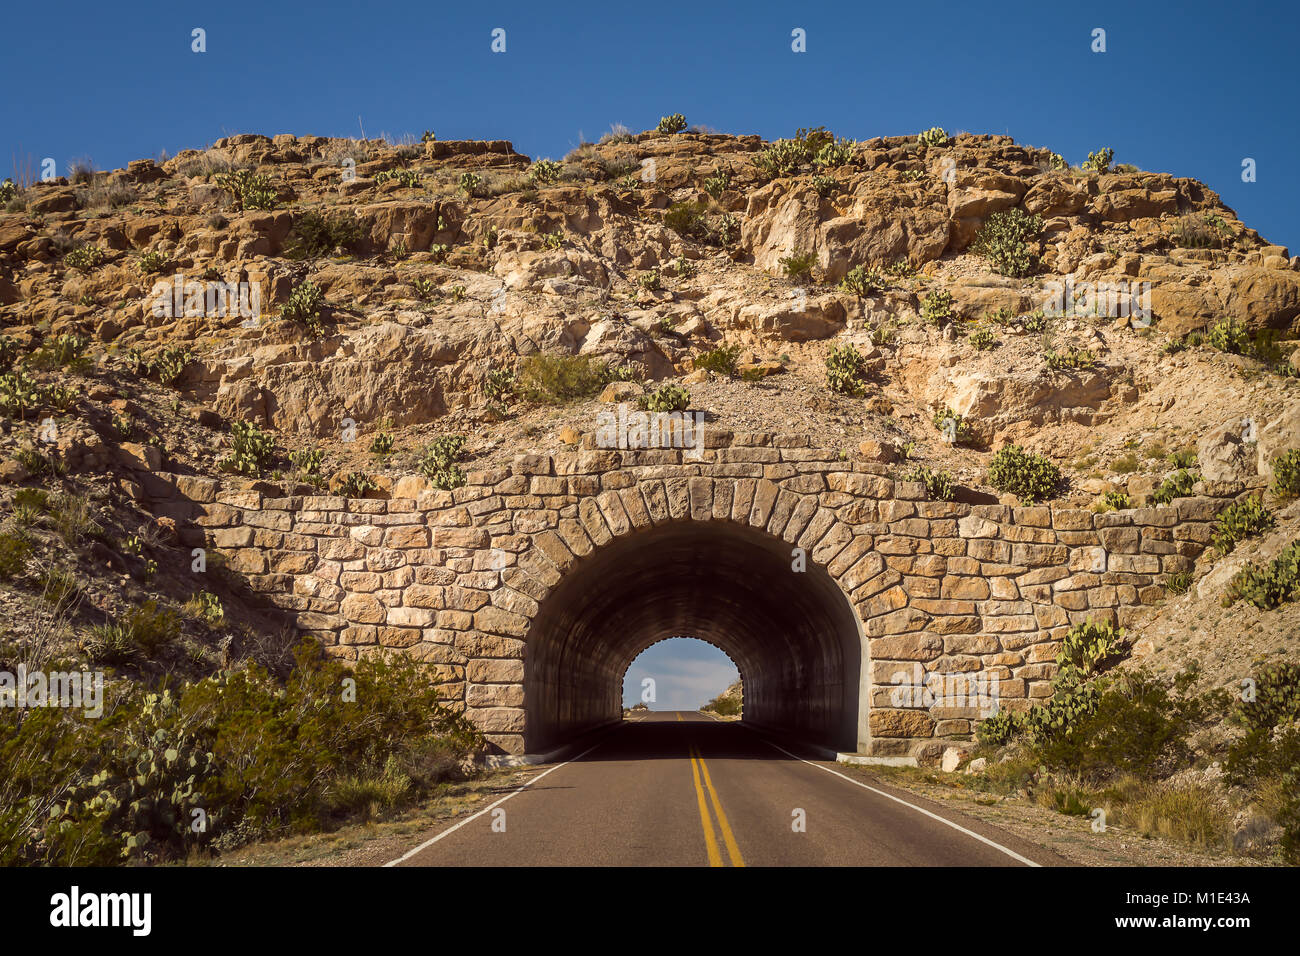 Stone Arch Entrance Wall at Big Bend National Park in Texas Stock Photo